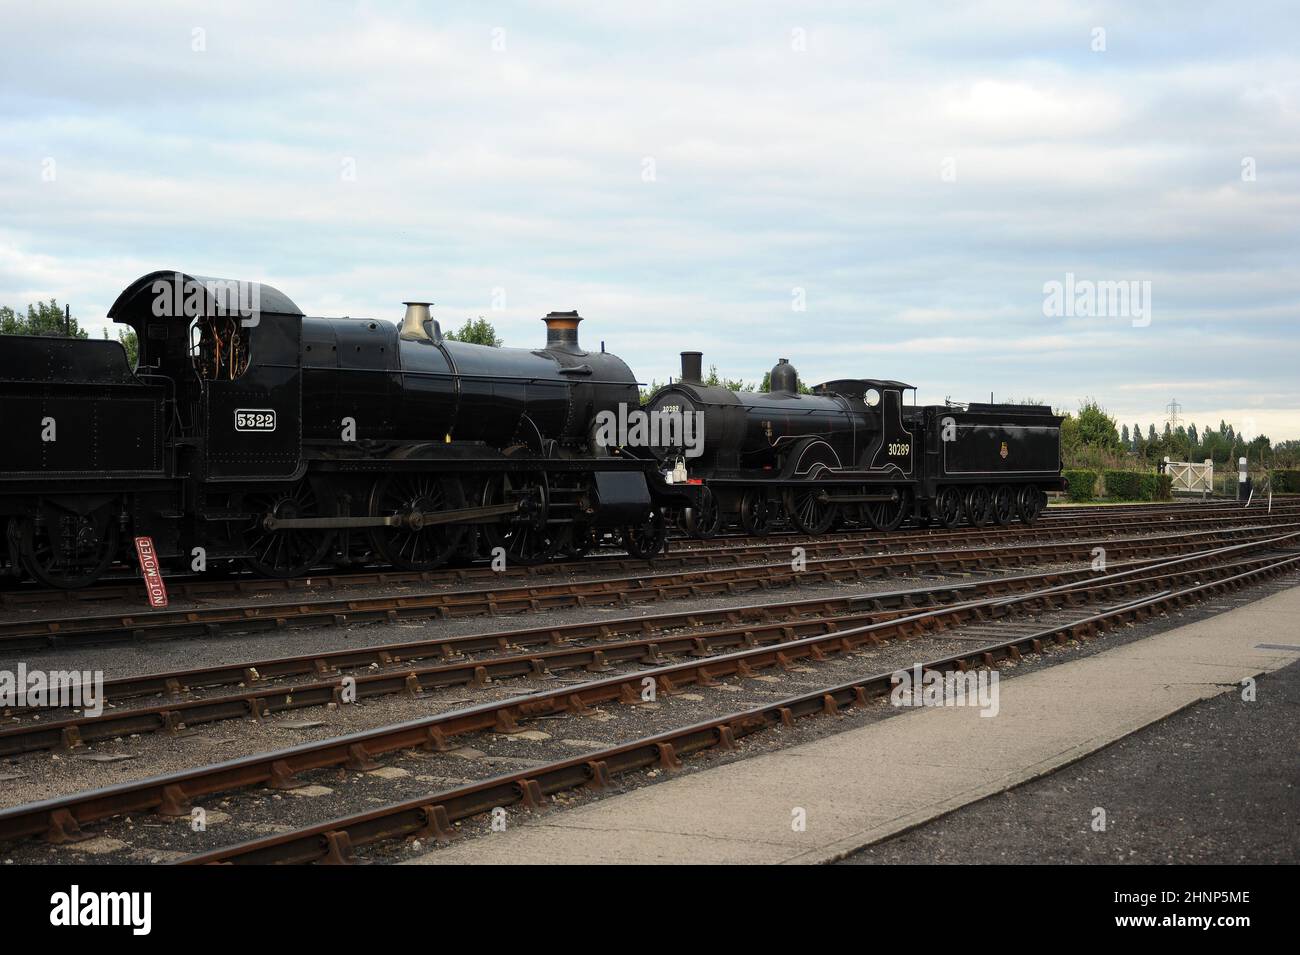 '5322' and '30120' (running as '30289') on shed at Didcot. Stock Photo